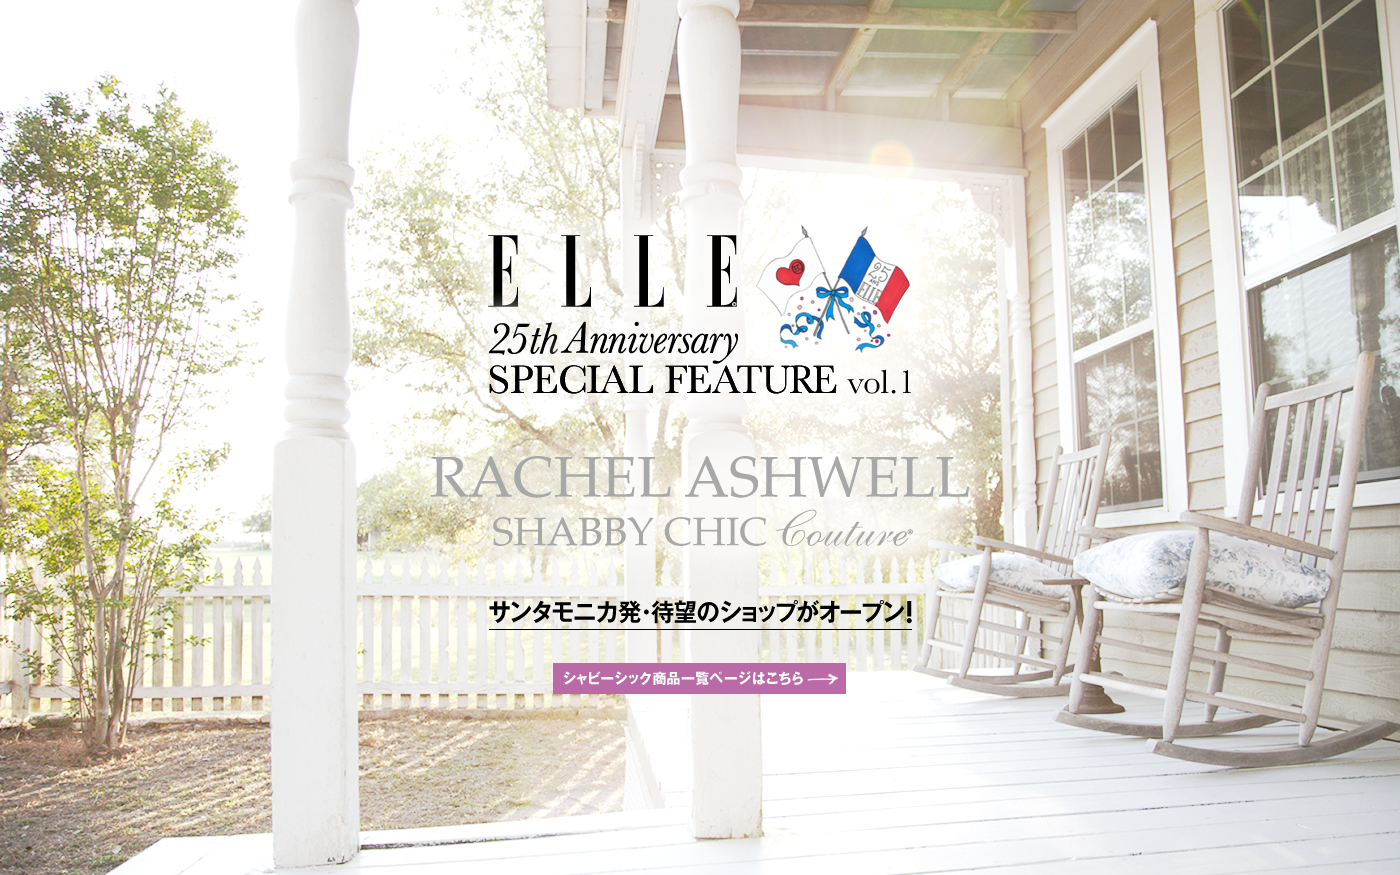 ELLE 25th Anniversary SPECIAL FEATURE vol.1 RACHEL ASHWELL SHABBY CHIC COUTURE